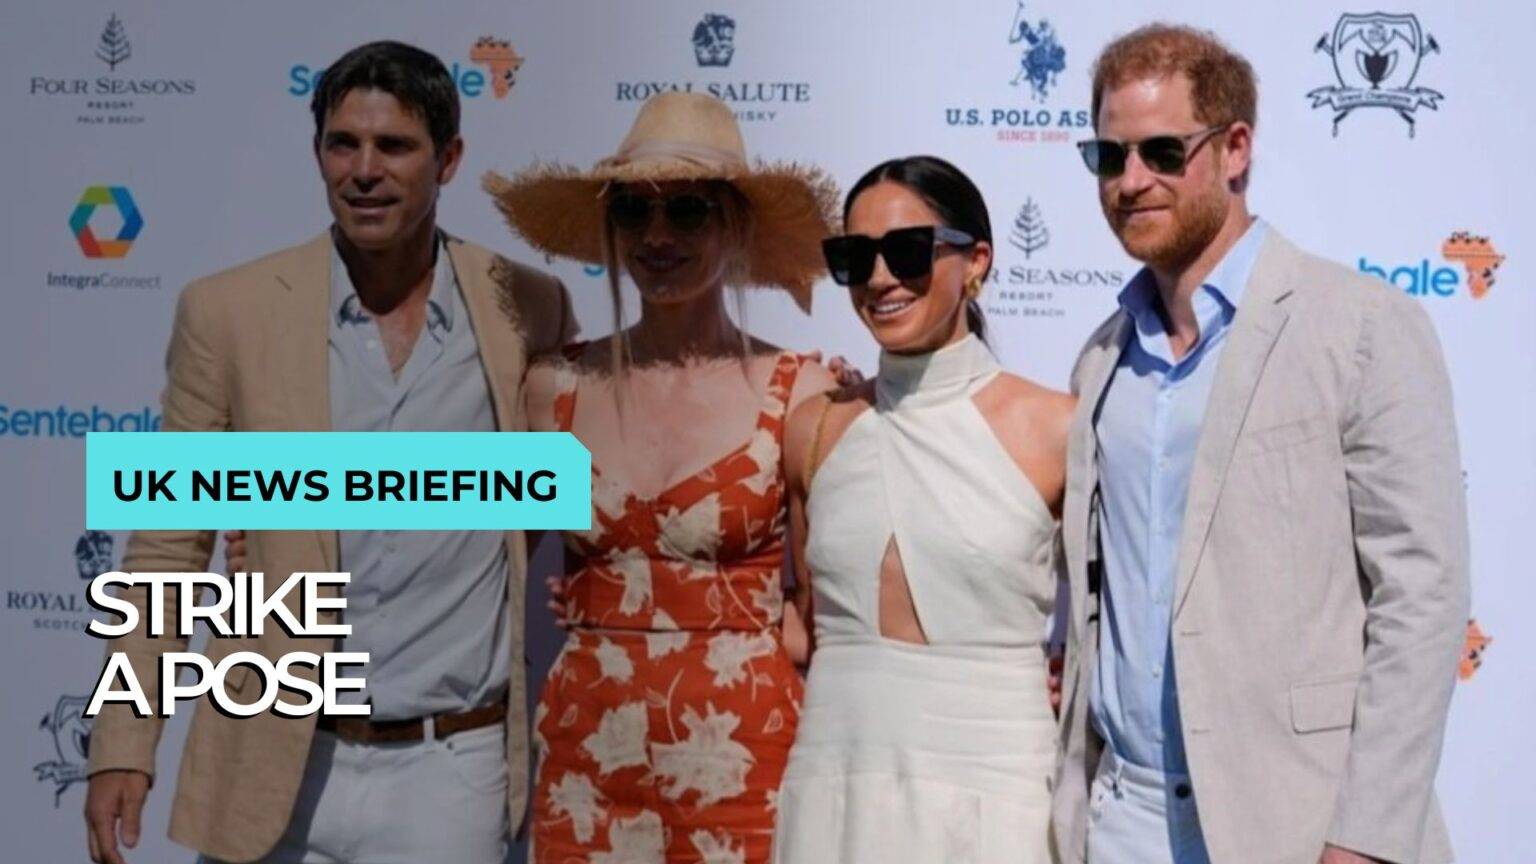 Meghan Markle advises a woman against posing next to Prince Harry for a photo